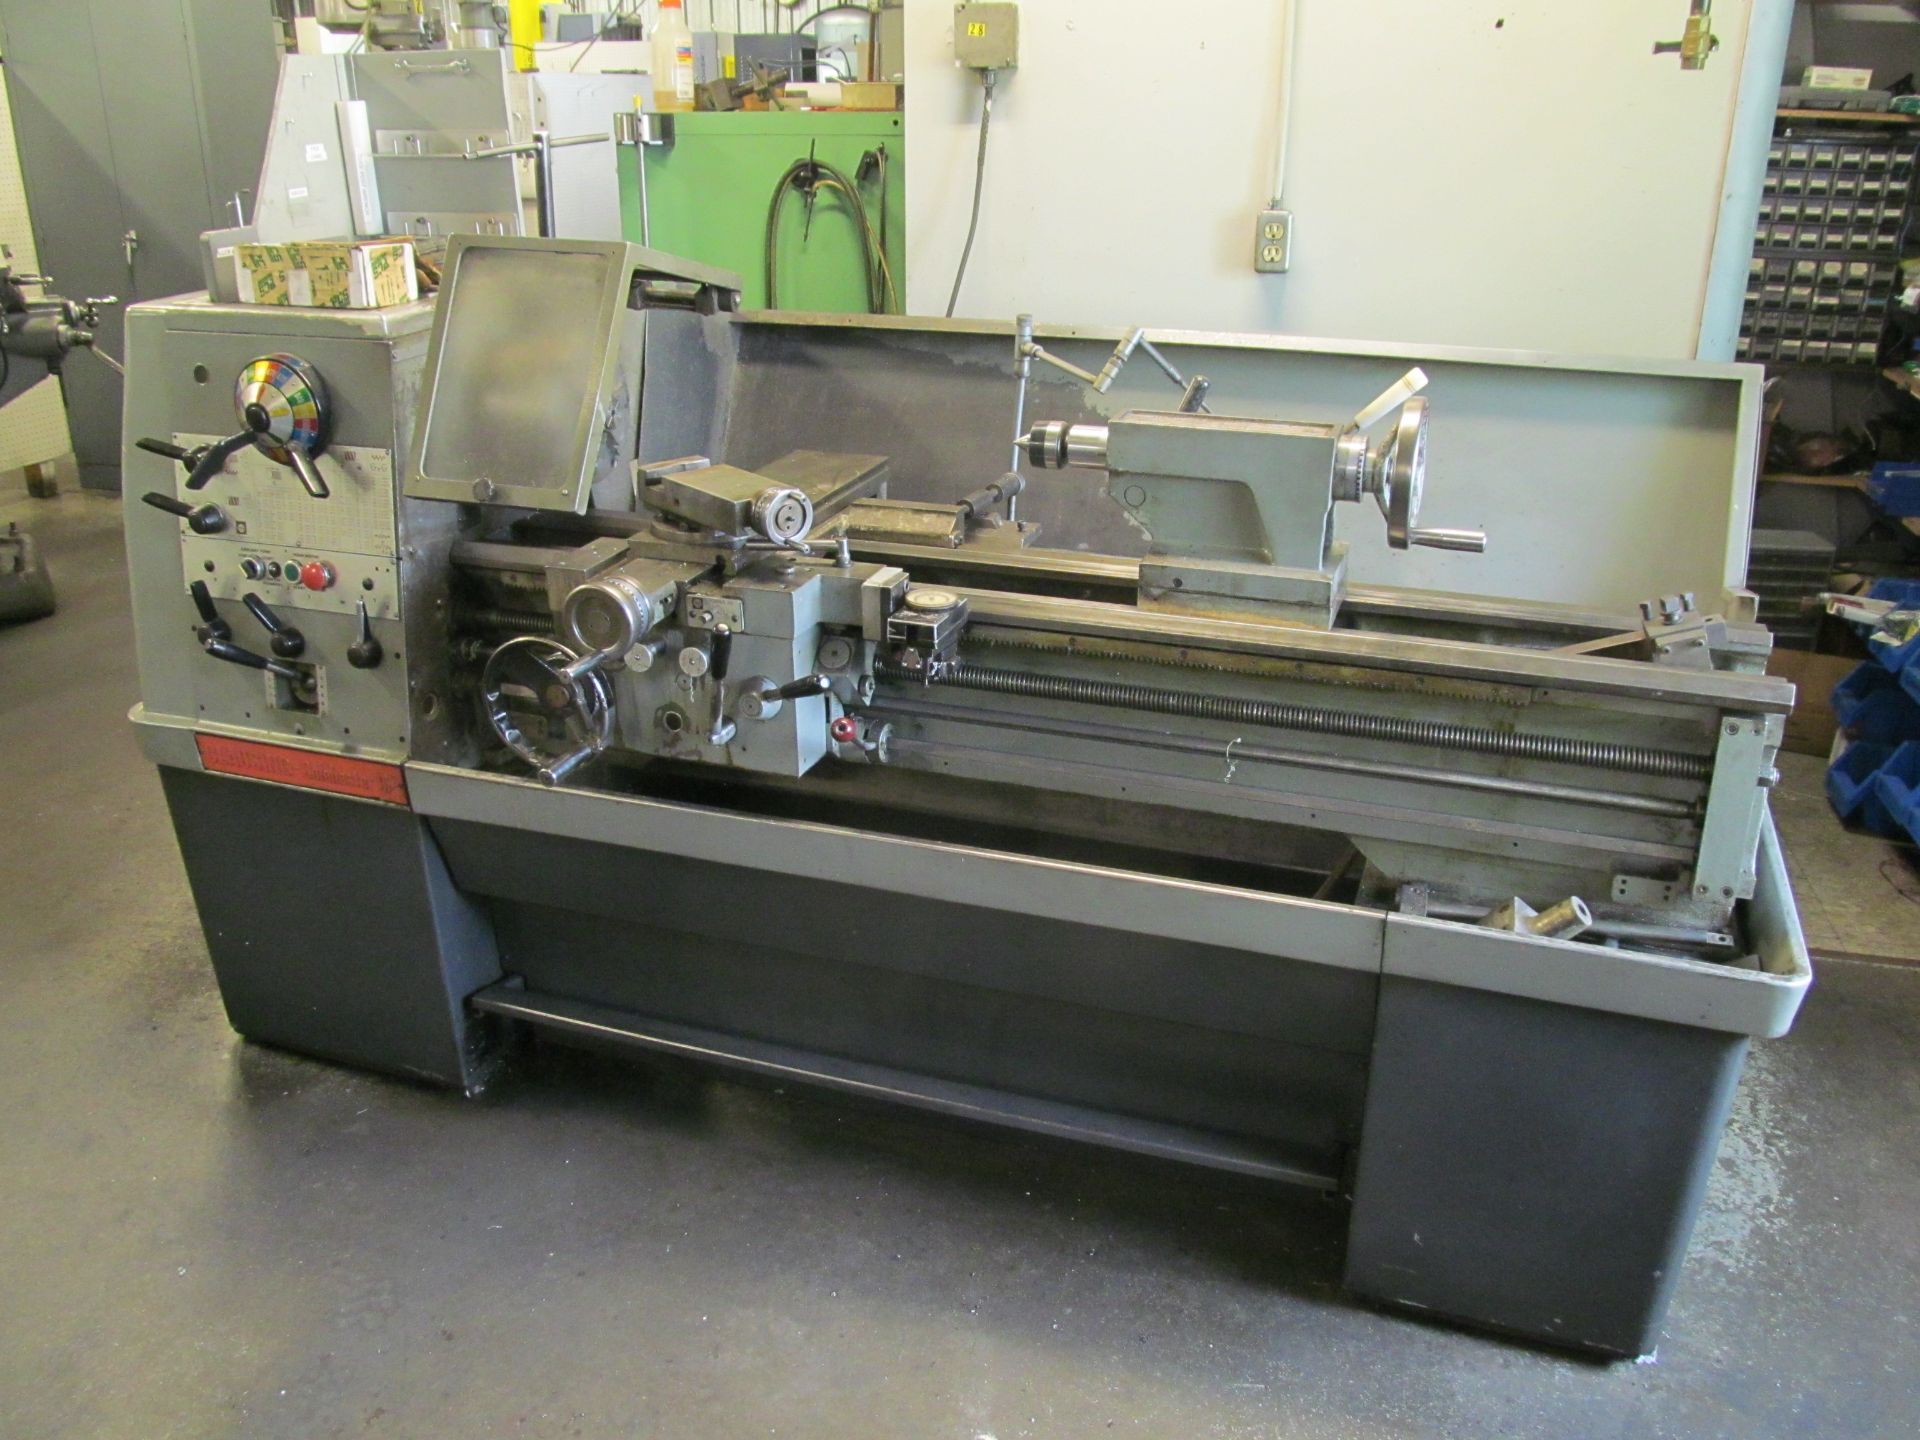 15" x 60" Clausing Colchester Lathe; s/n 6/0055/28789, (16) Speeds 25 - 2000 rpm, Inch & Metric